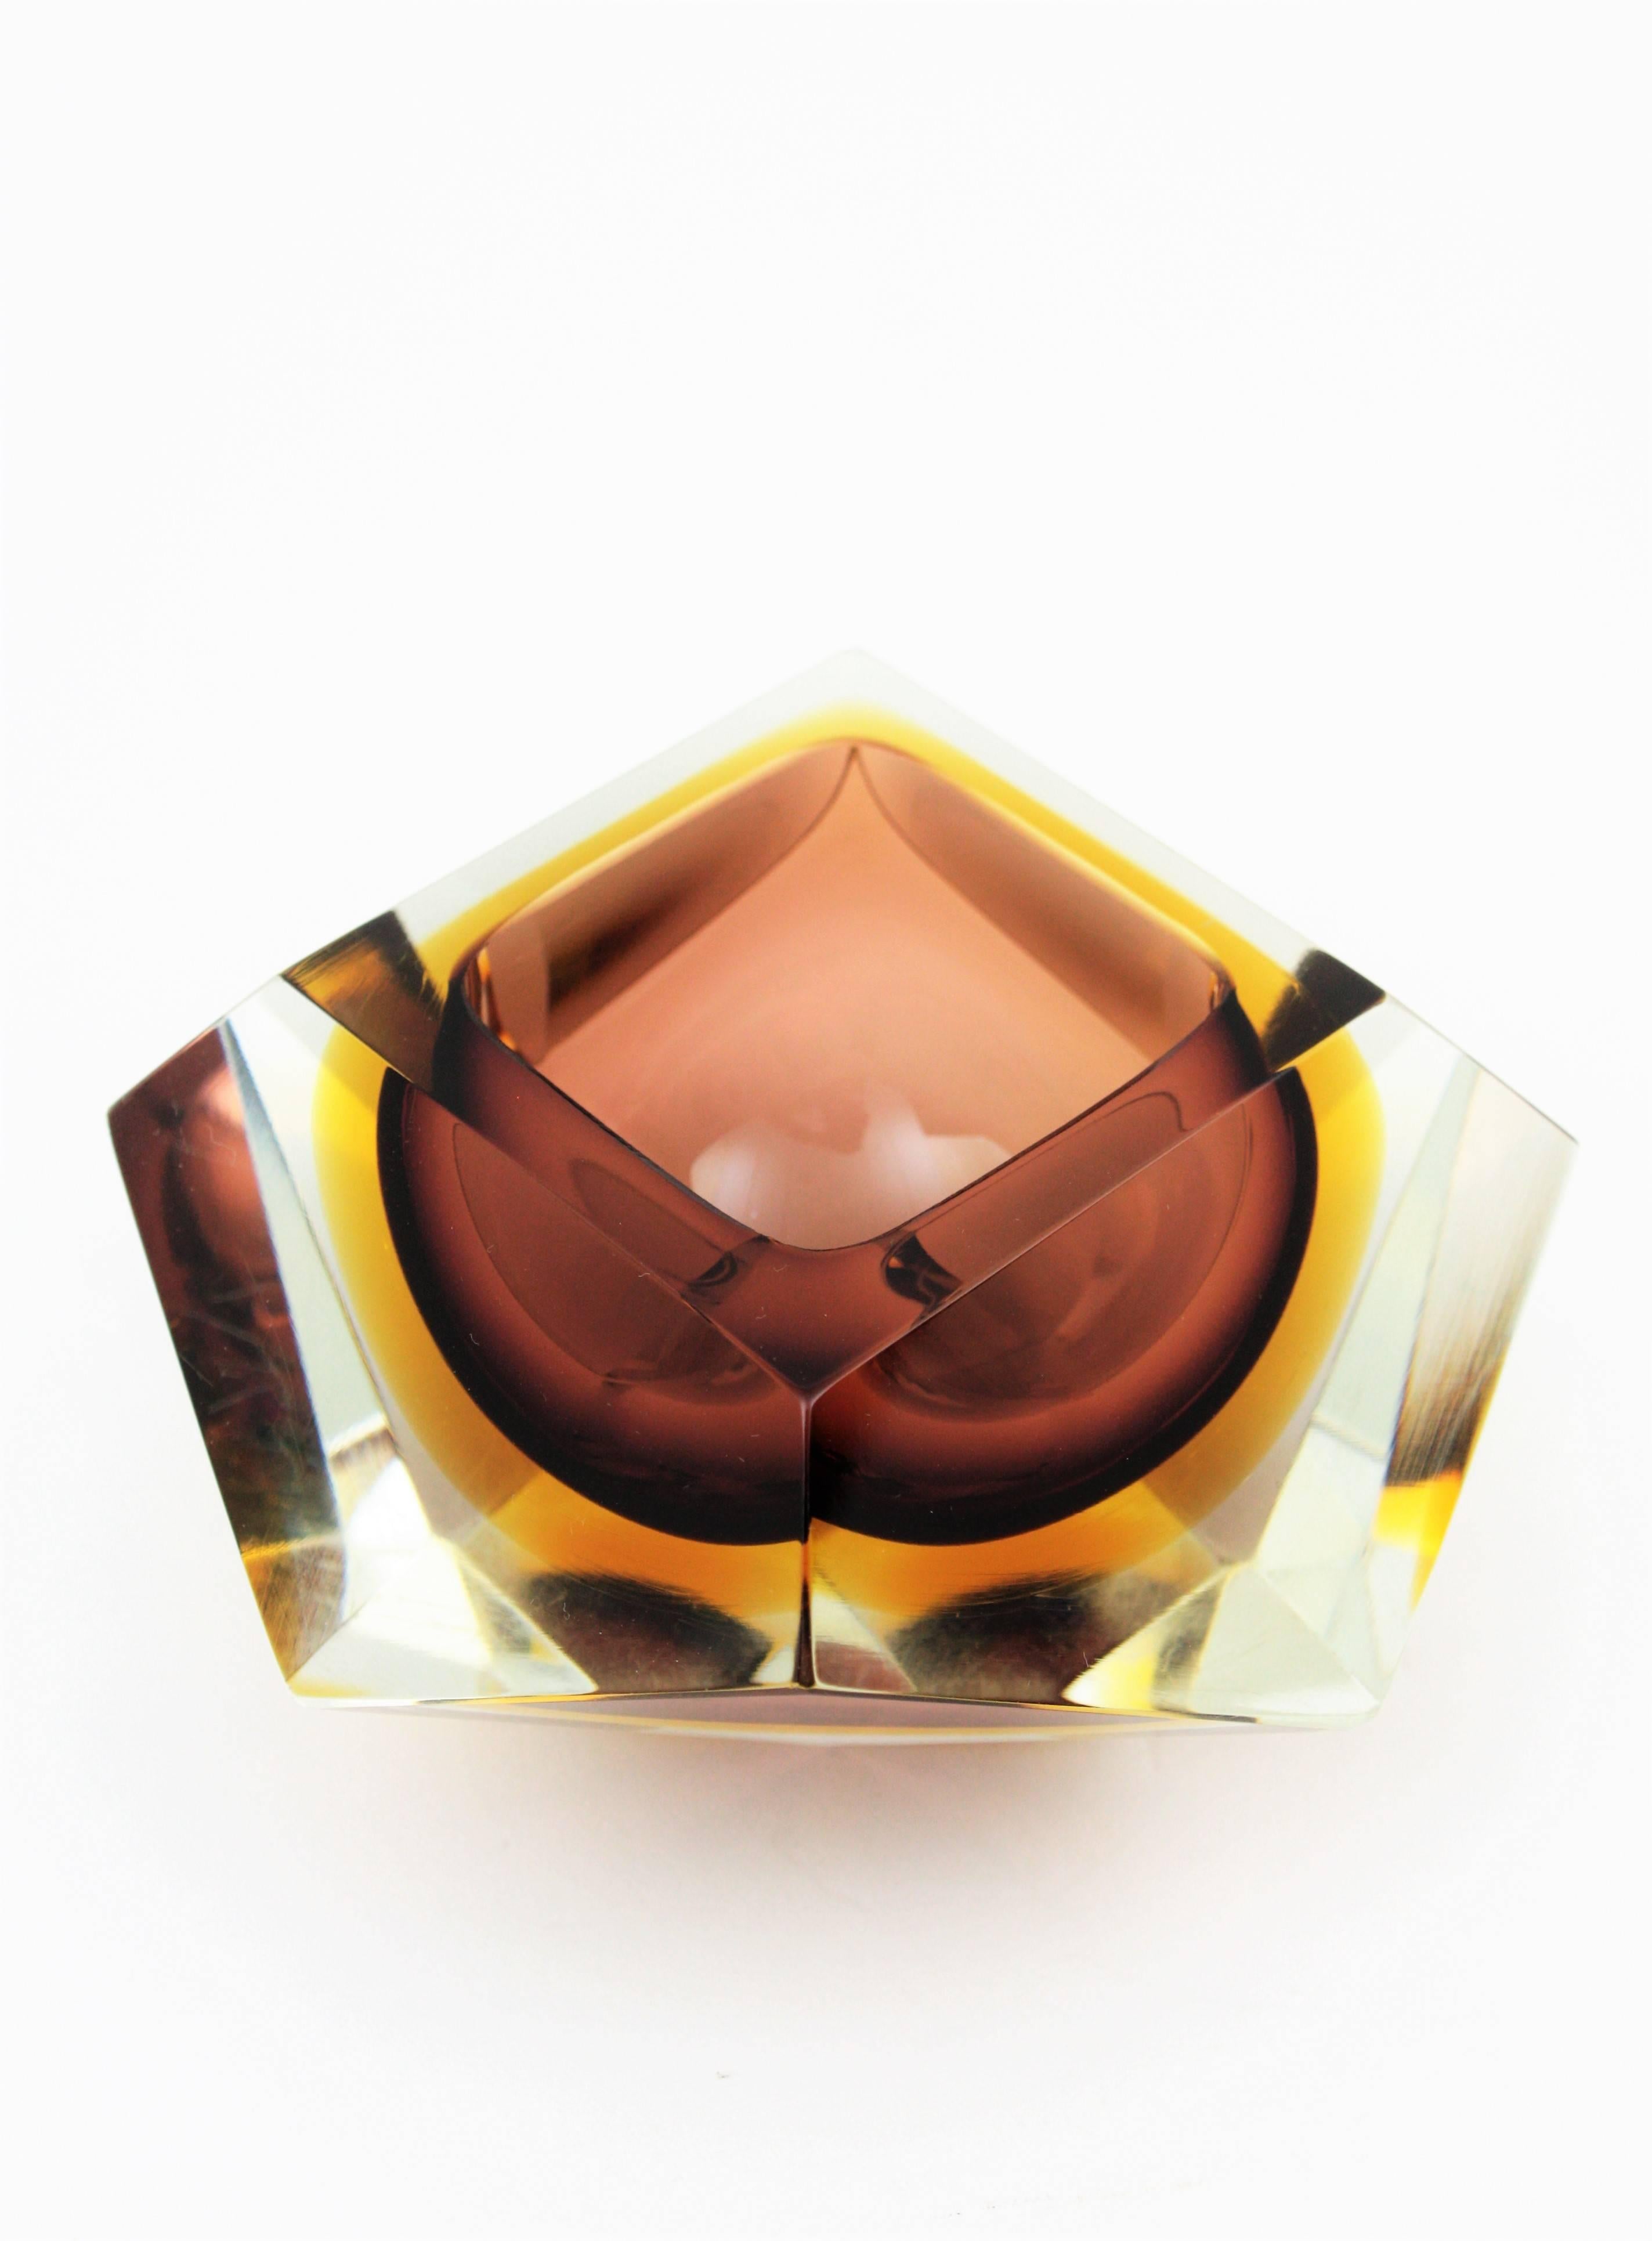 A beautiful brown and yellow Sommerso faceted Murano glass bowl attributed to Flavio Poli. Italy, 1950s.
Brown and amber glass cased into clear glass and a highly decorative twelve faced geometric design.
Useful as bowl, ashtray, jewelry bowl or